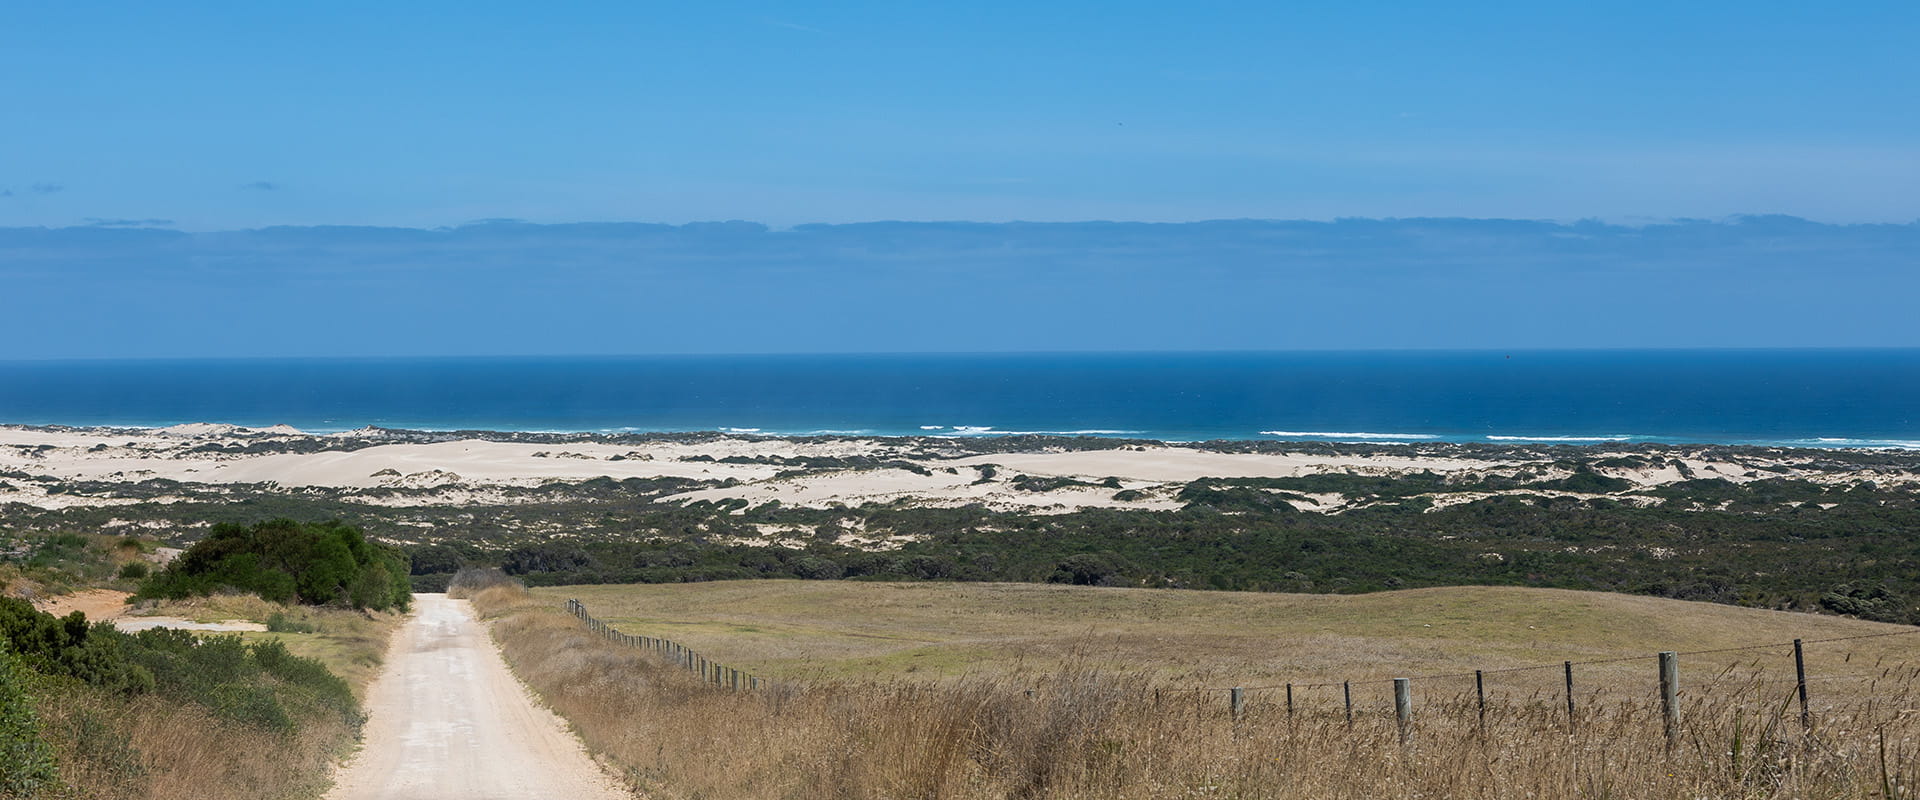 A straight dirt road leads down into sand dunes beyond which lies the ocean